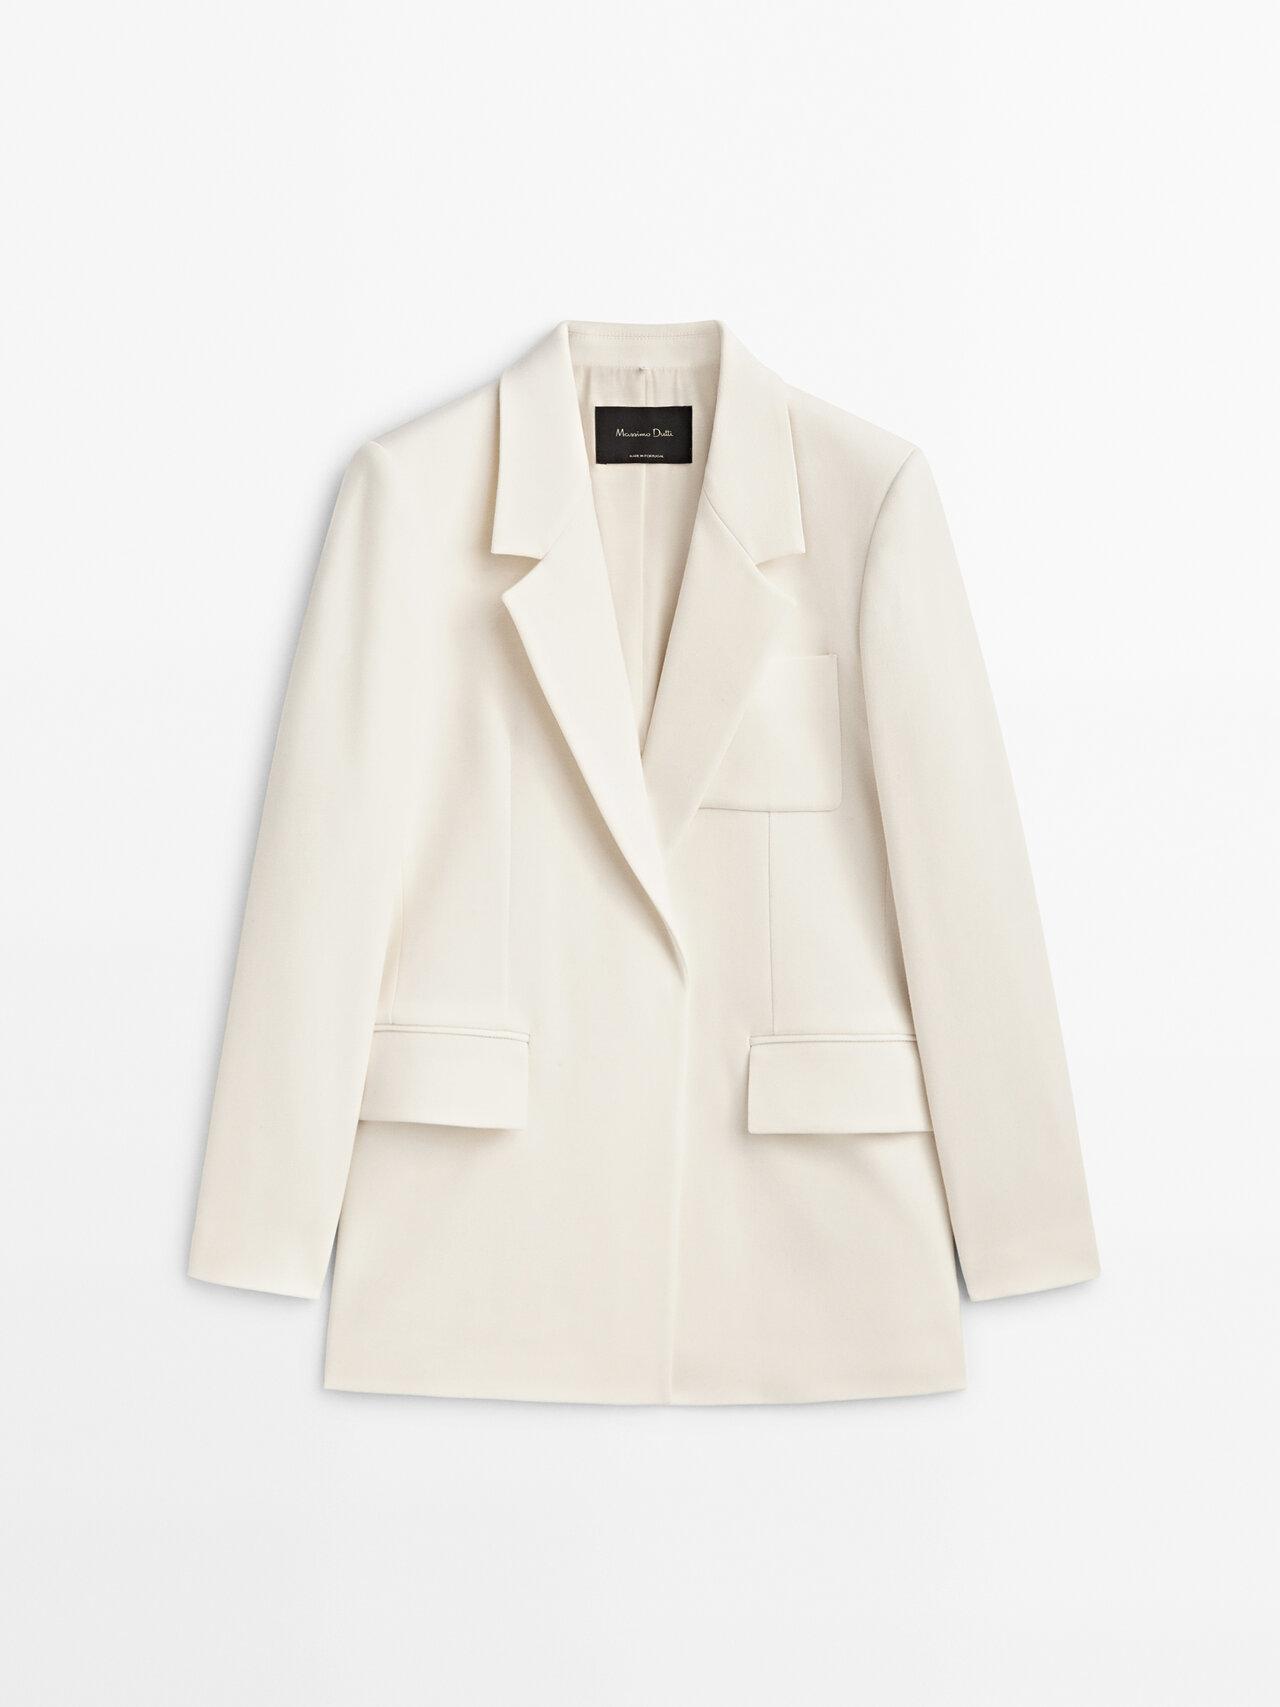 MASSIMO DUTTI Fitted Blazer With Pocket in White | Lyst